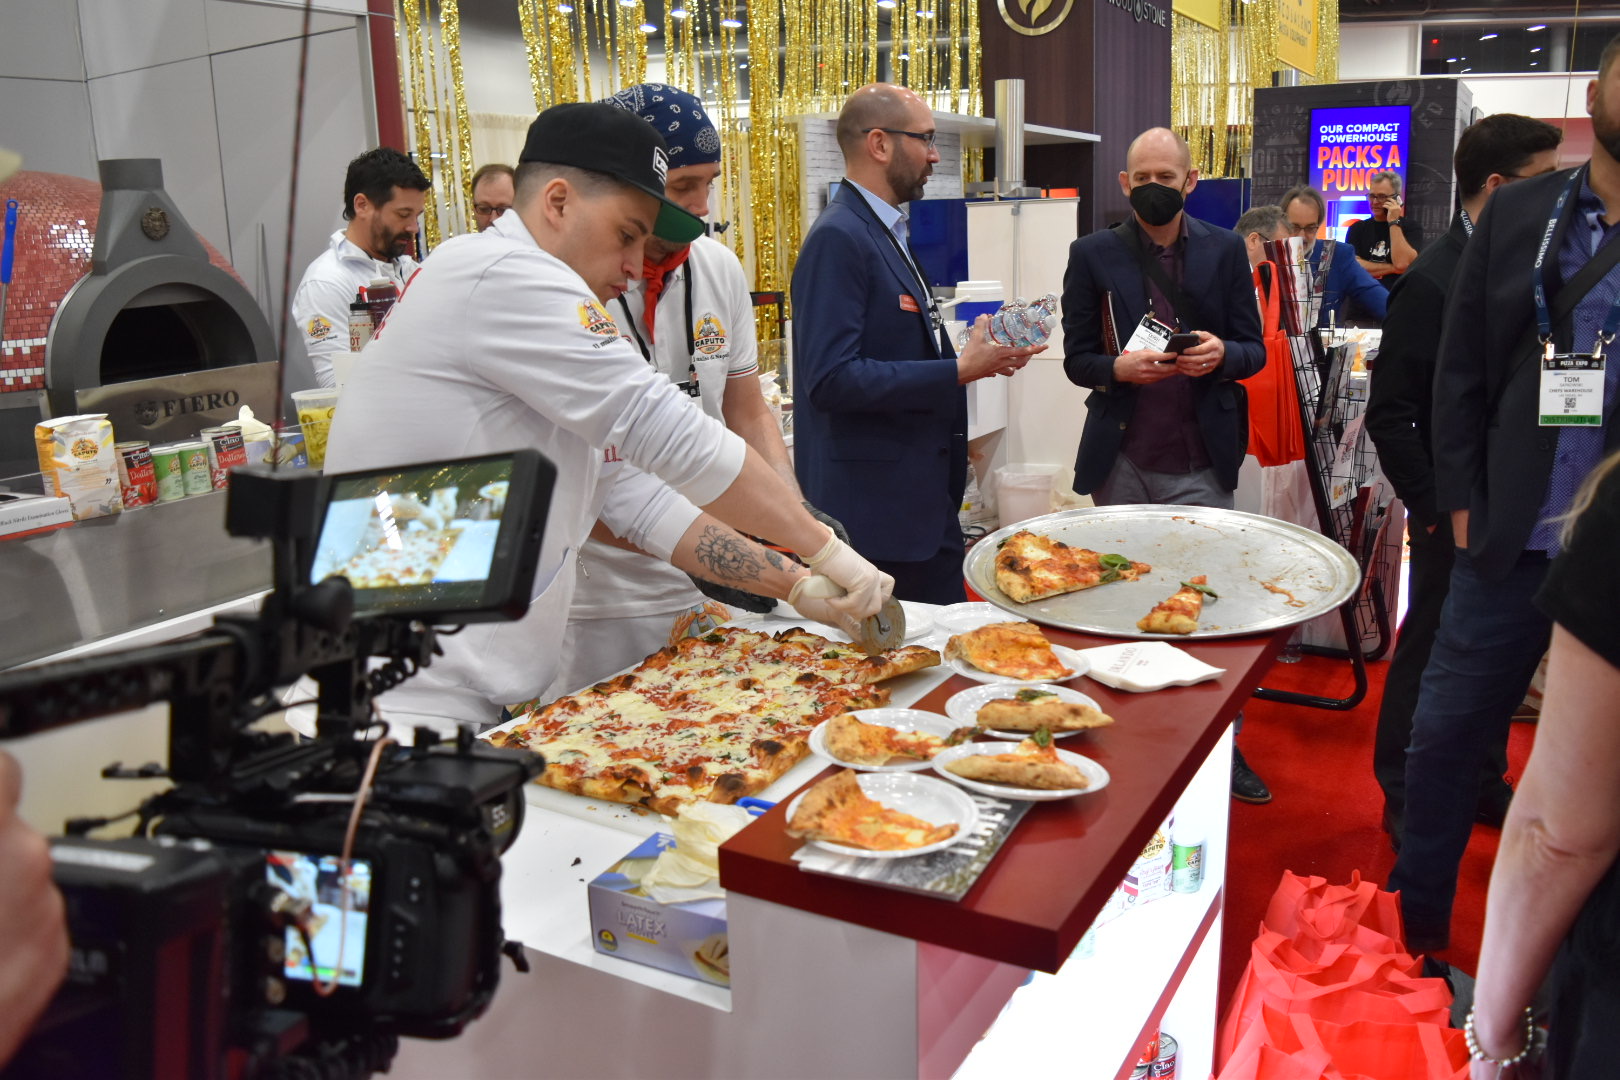 Pizzaioli Cutting a Roman Style Pizza in the Orlando Booth